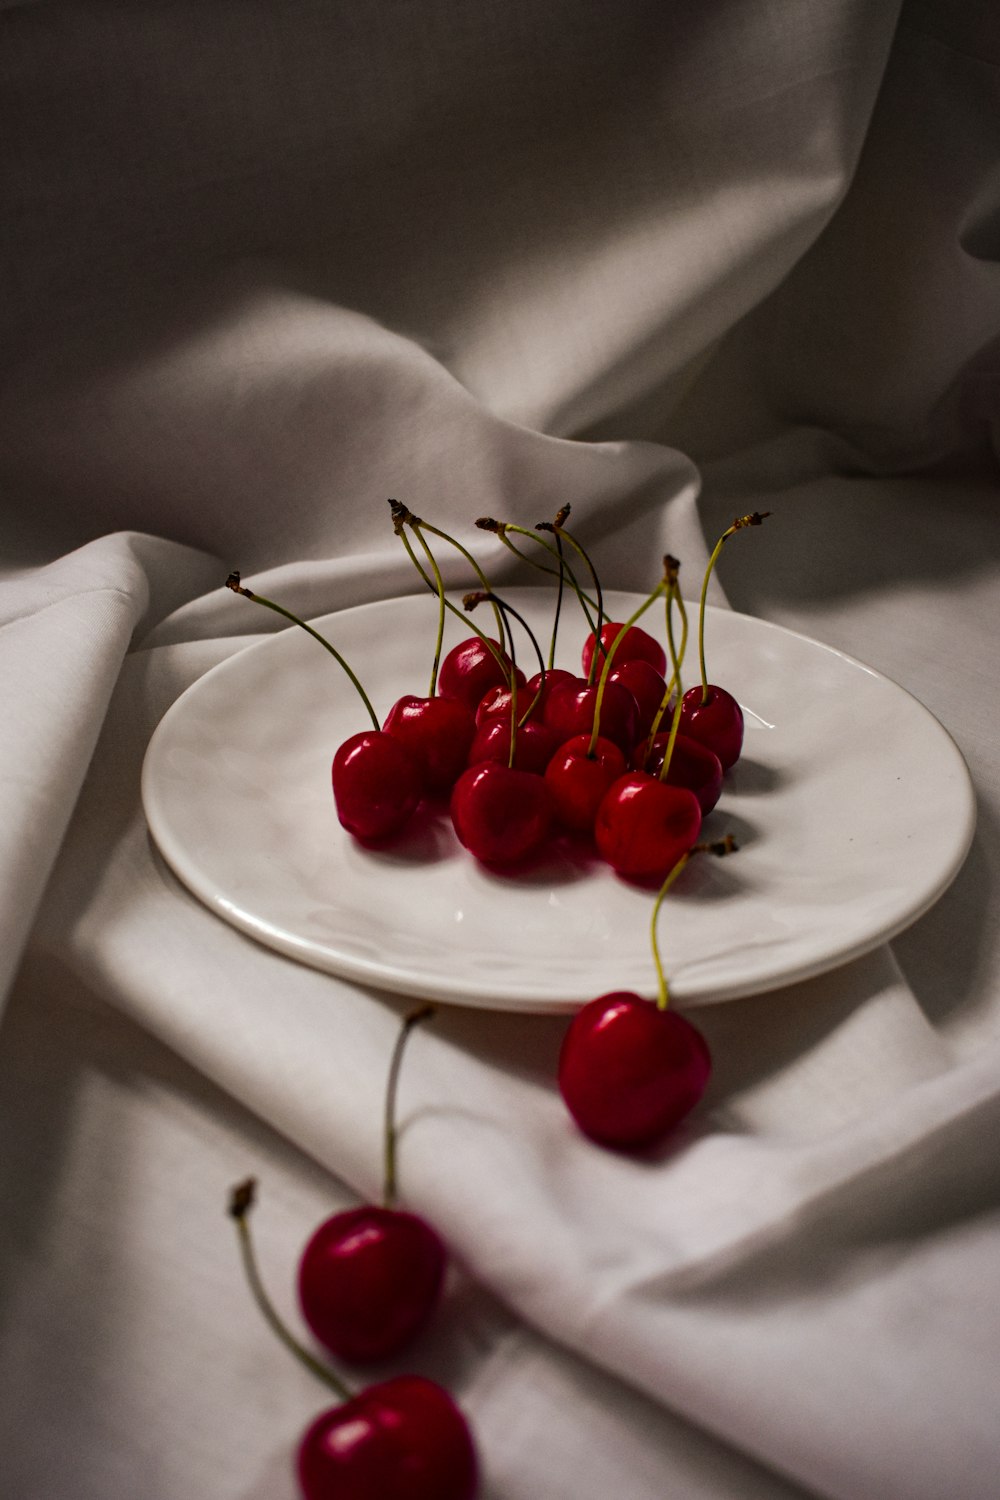 red cherries on white ceramic plate, The health benefits of cherries, learn more from NWP, non political news source, health and wellness no bias news, food